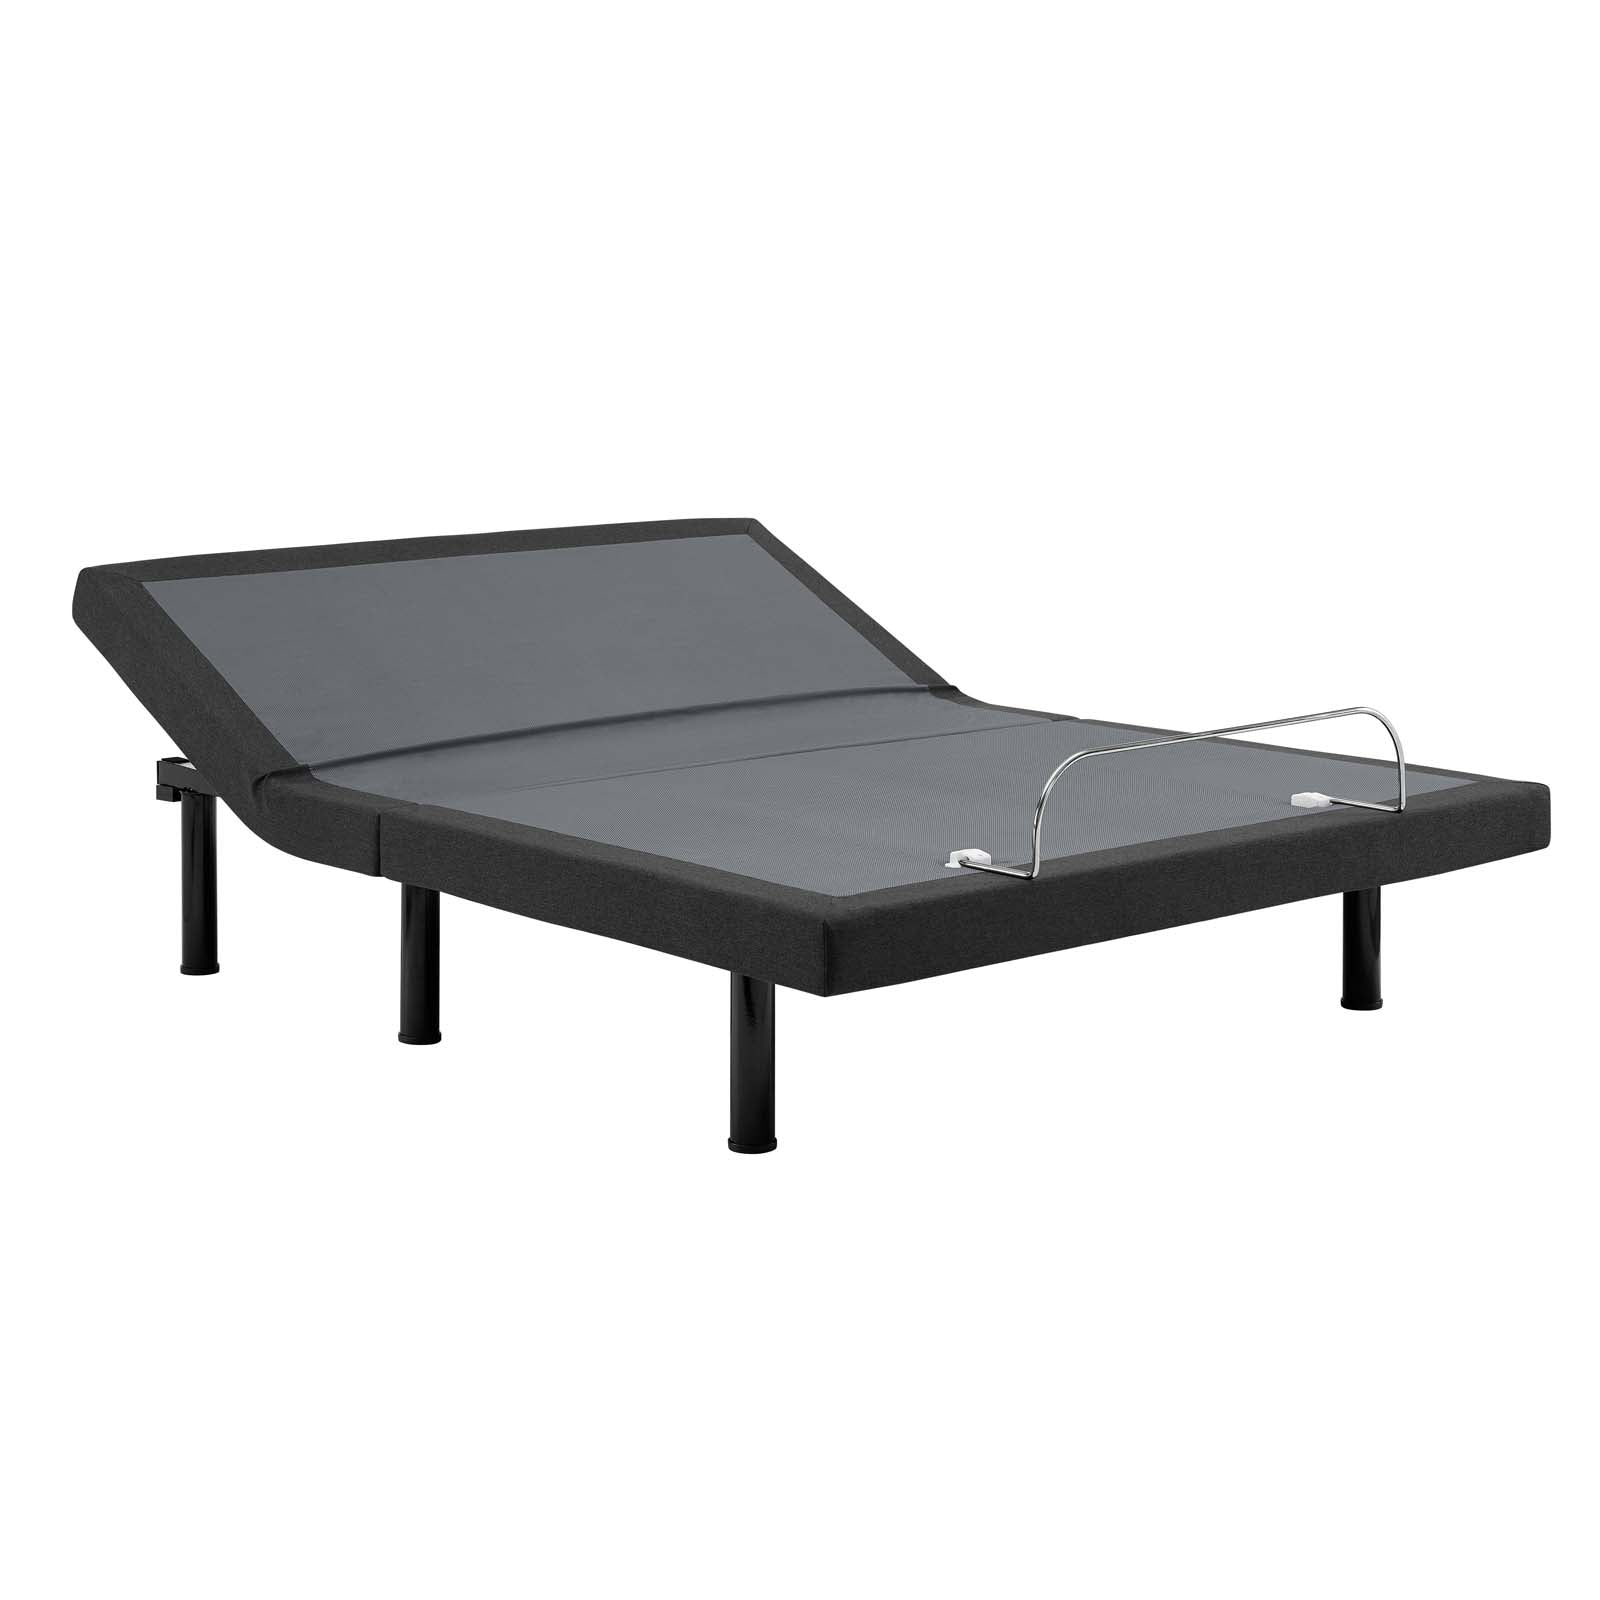 Modway Beds - Transform Adjustable Queen Wireless Remote Bed Base Gray